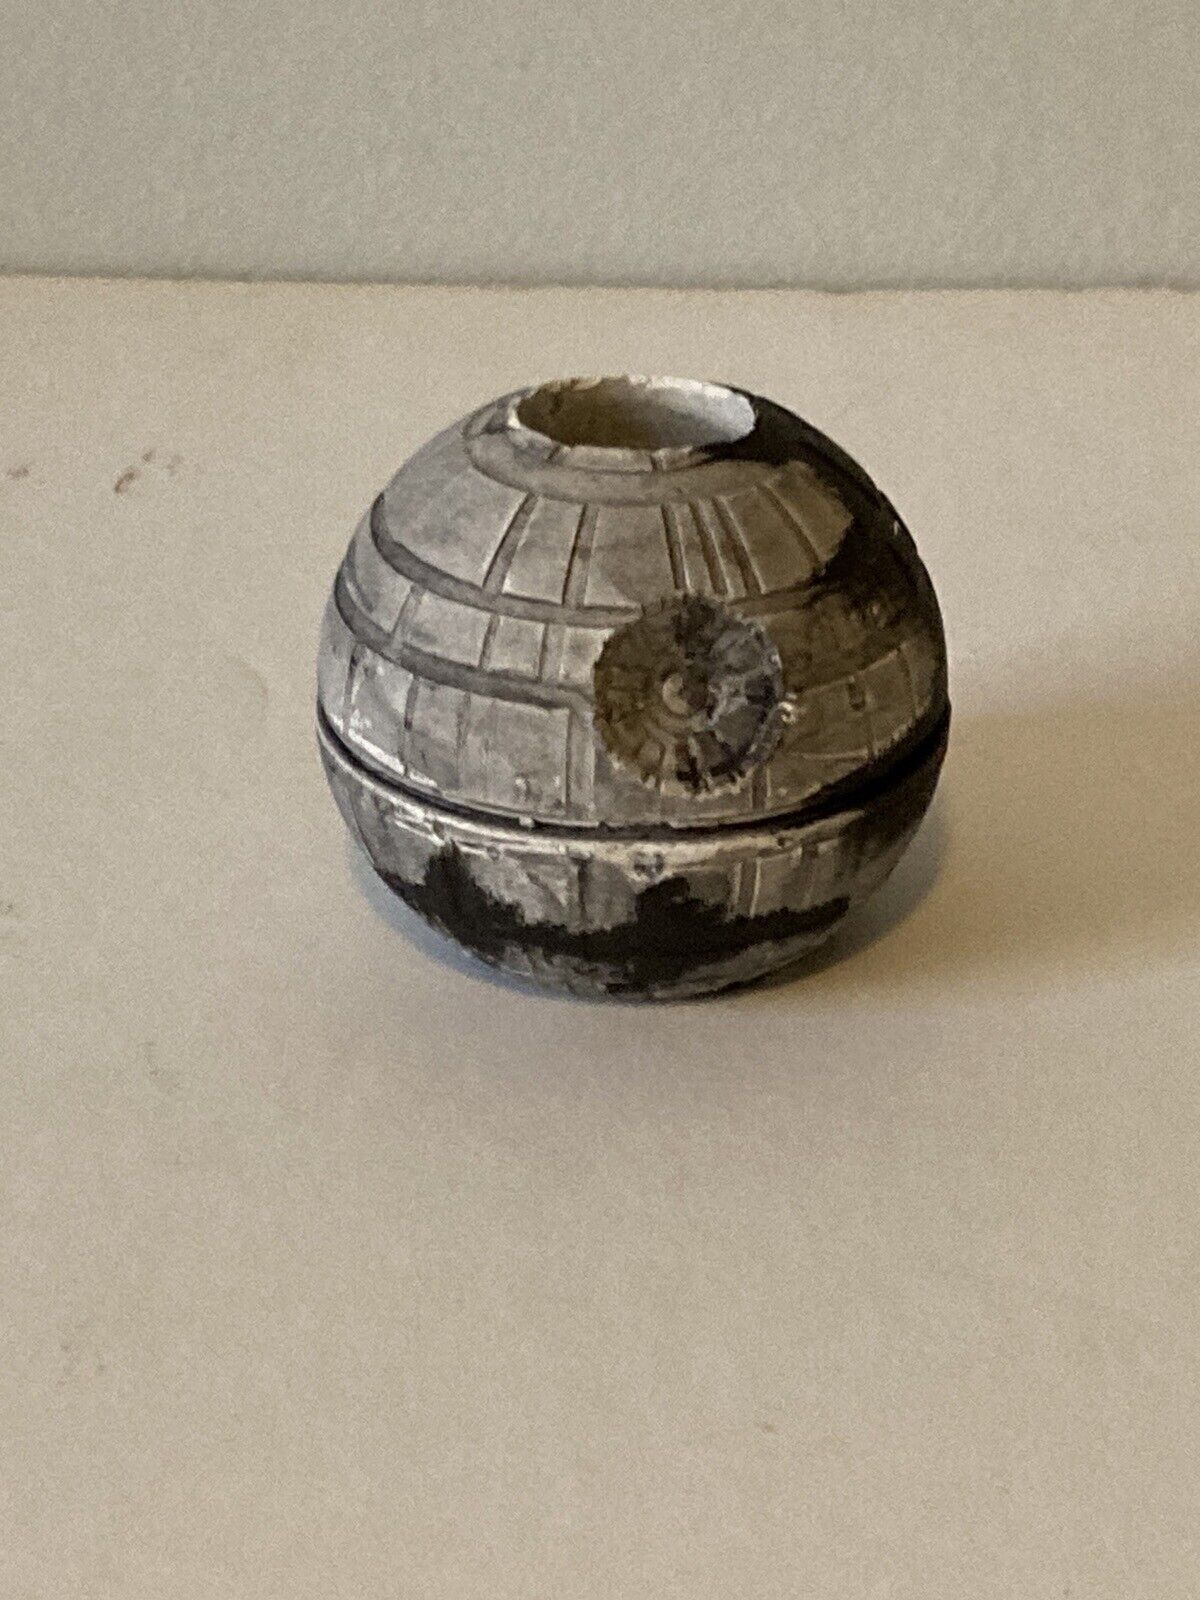 Death Star Paperweight or Toothpick or Candle Holder Used 2.25 x 2 Inches